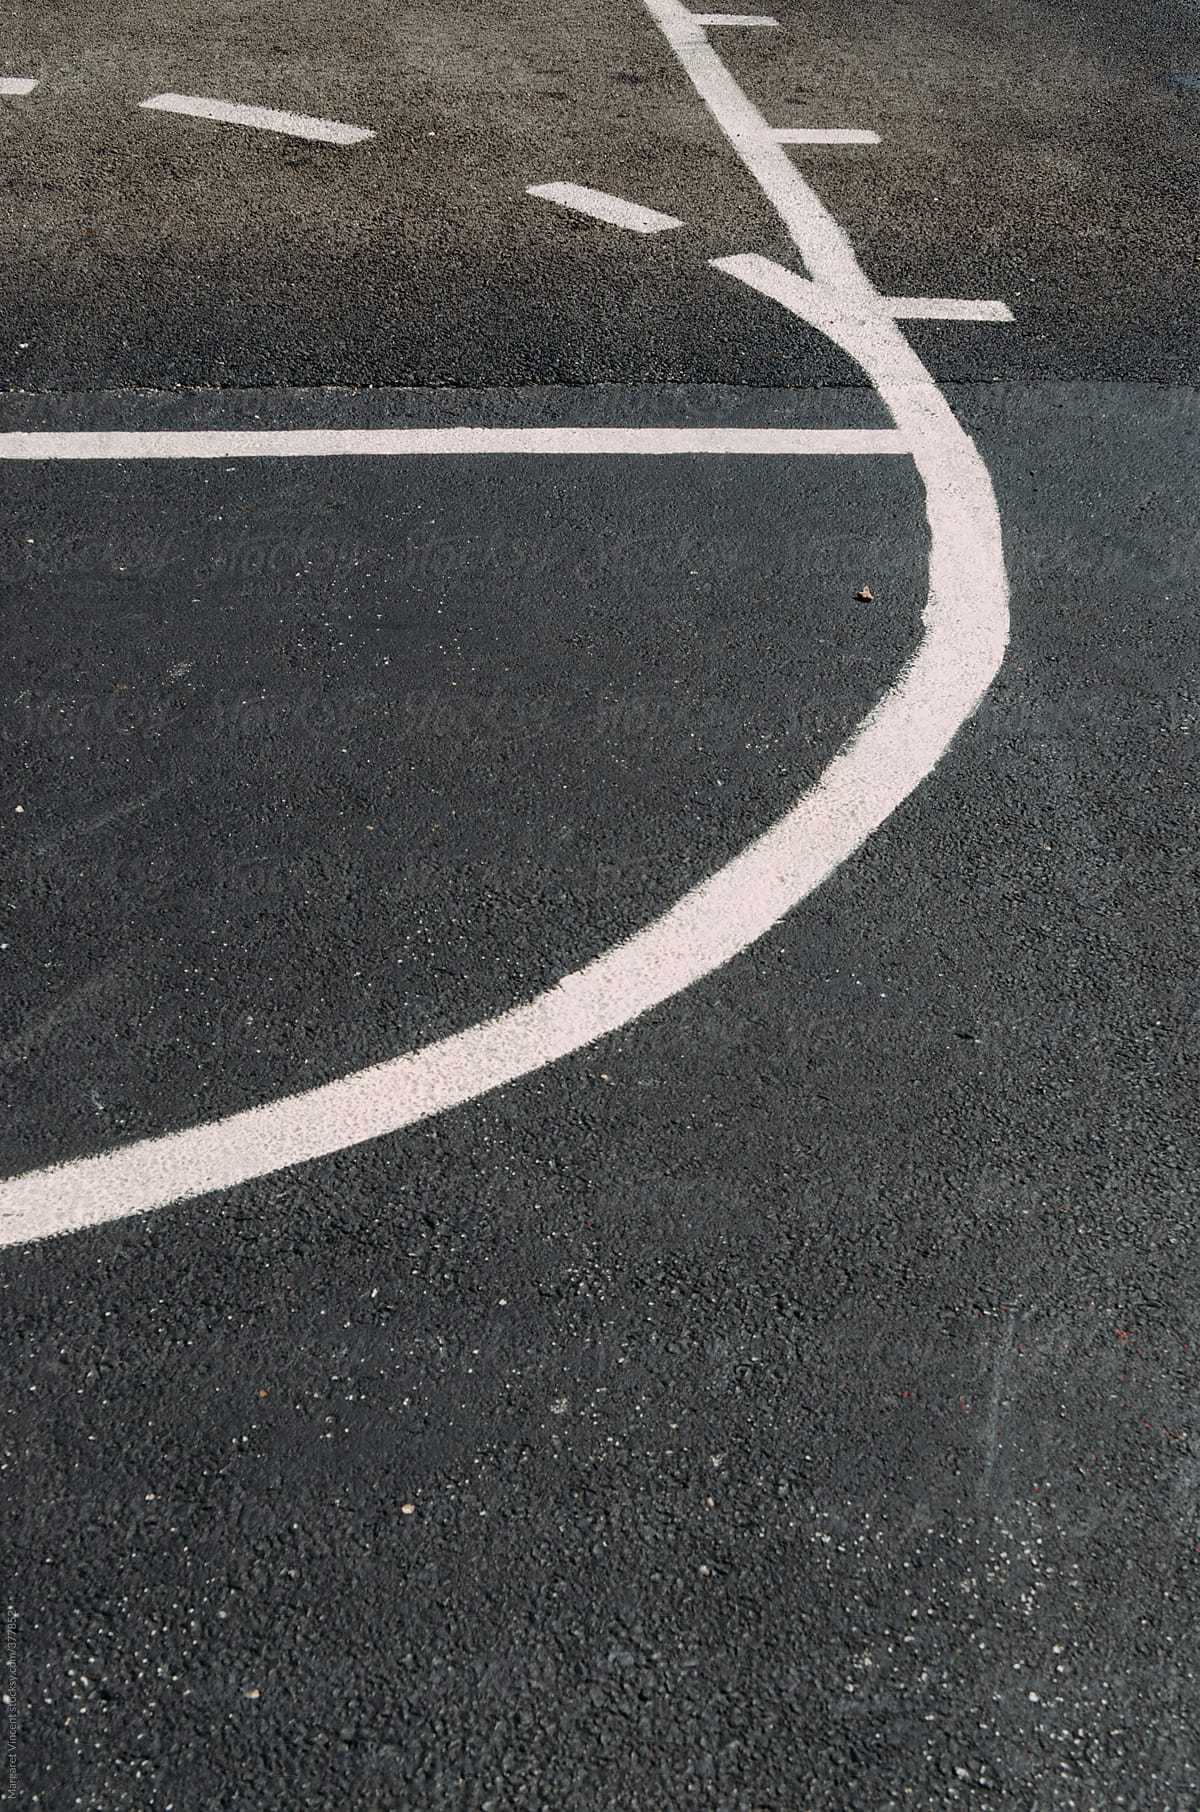 lines on a basketball court